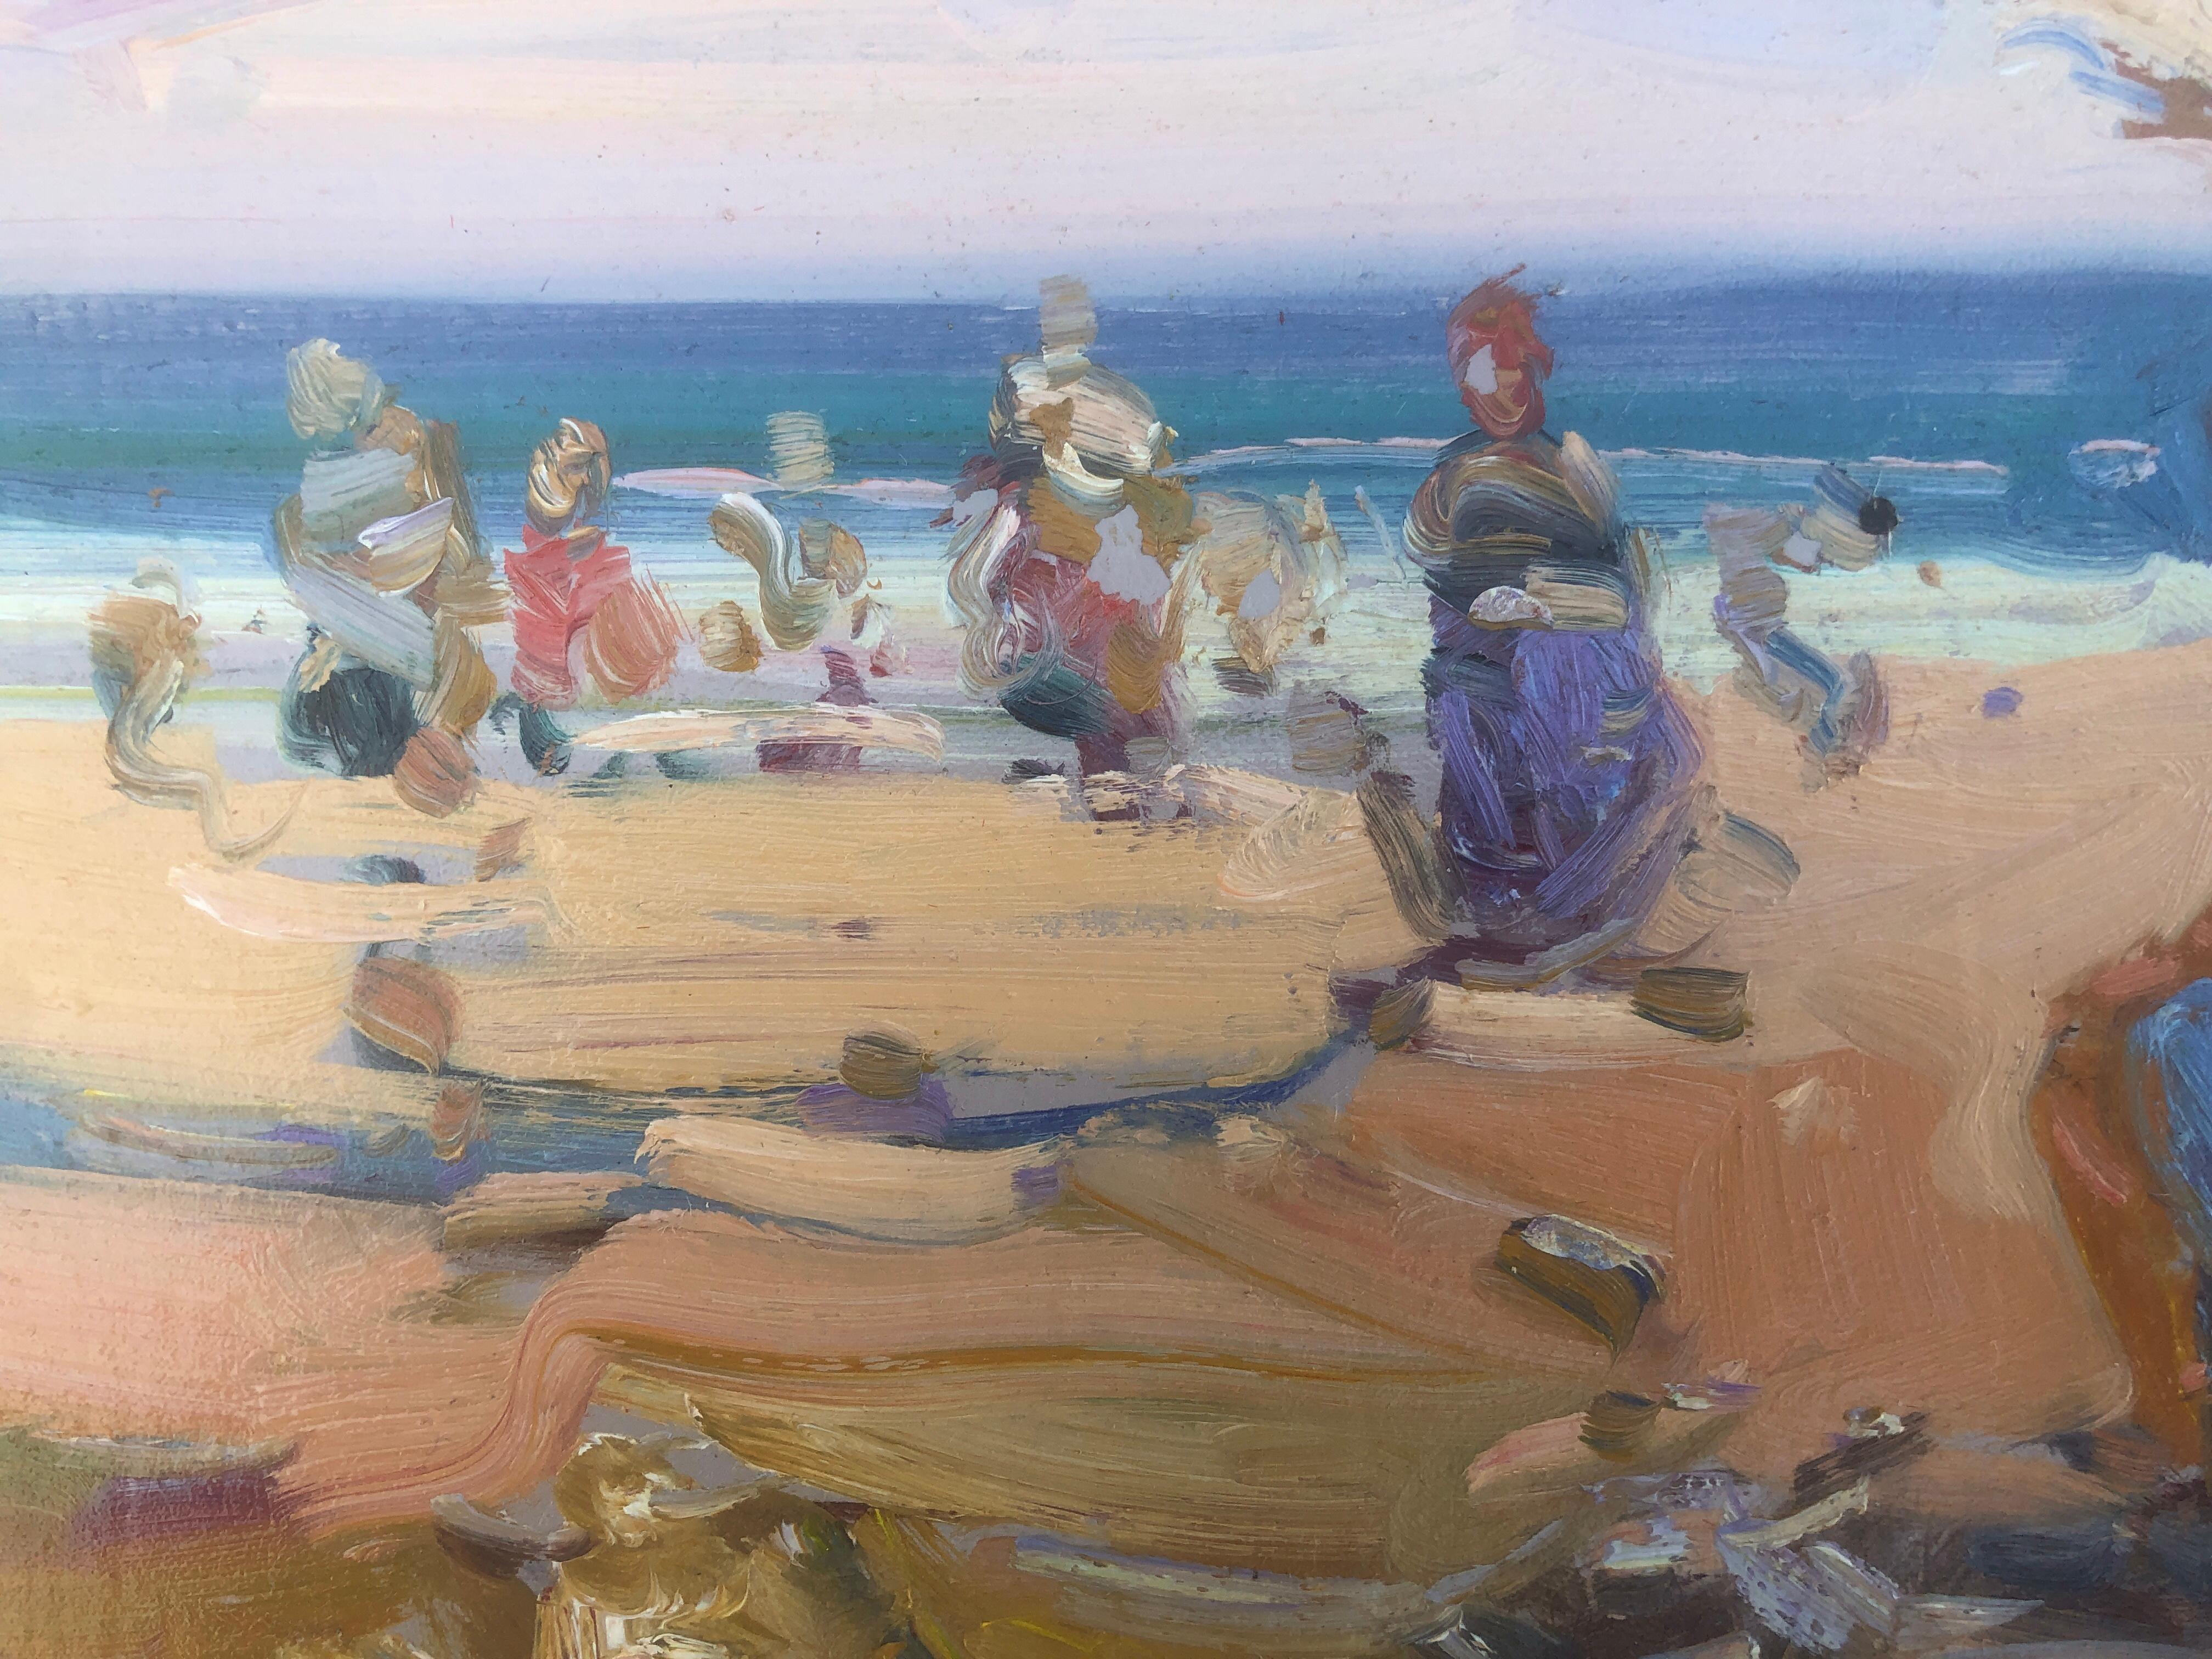 Beach's day Spain oil on board painting spanish seascape - Post-Impressionist Painting by Gabriel Casarrubios